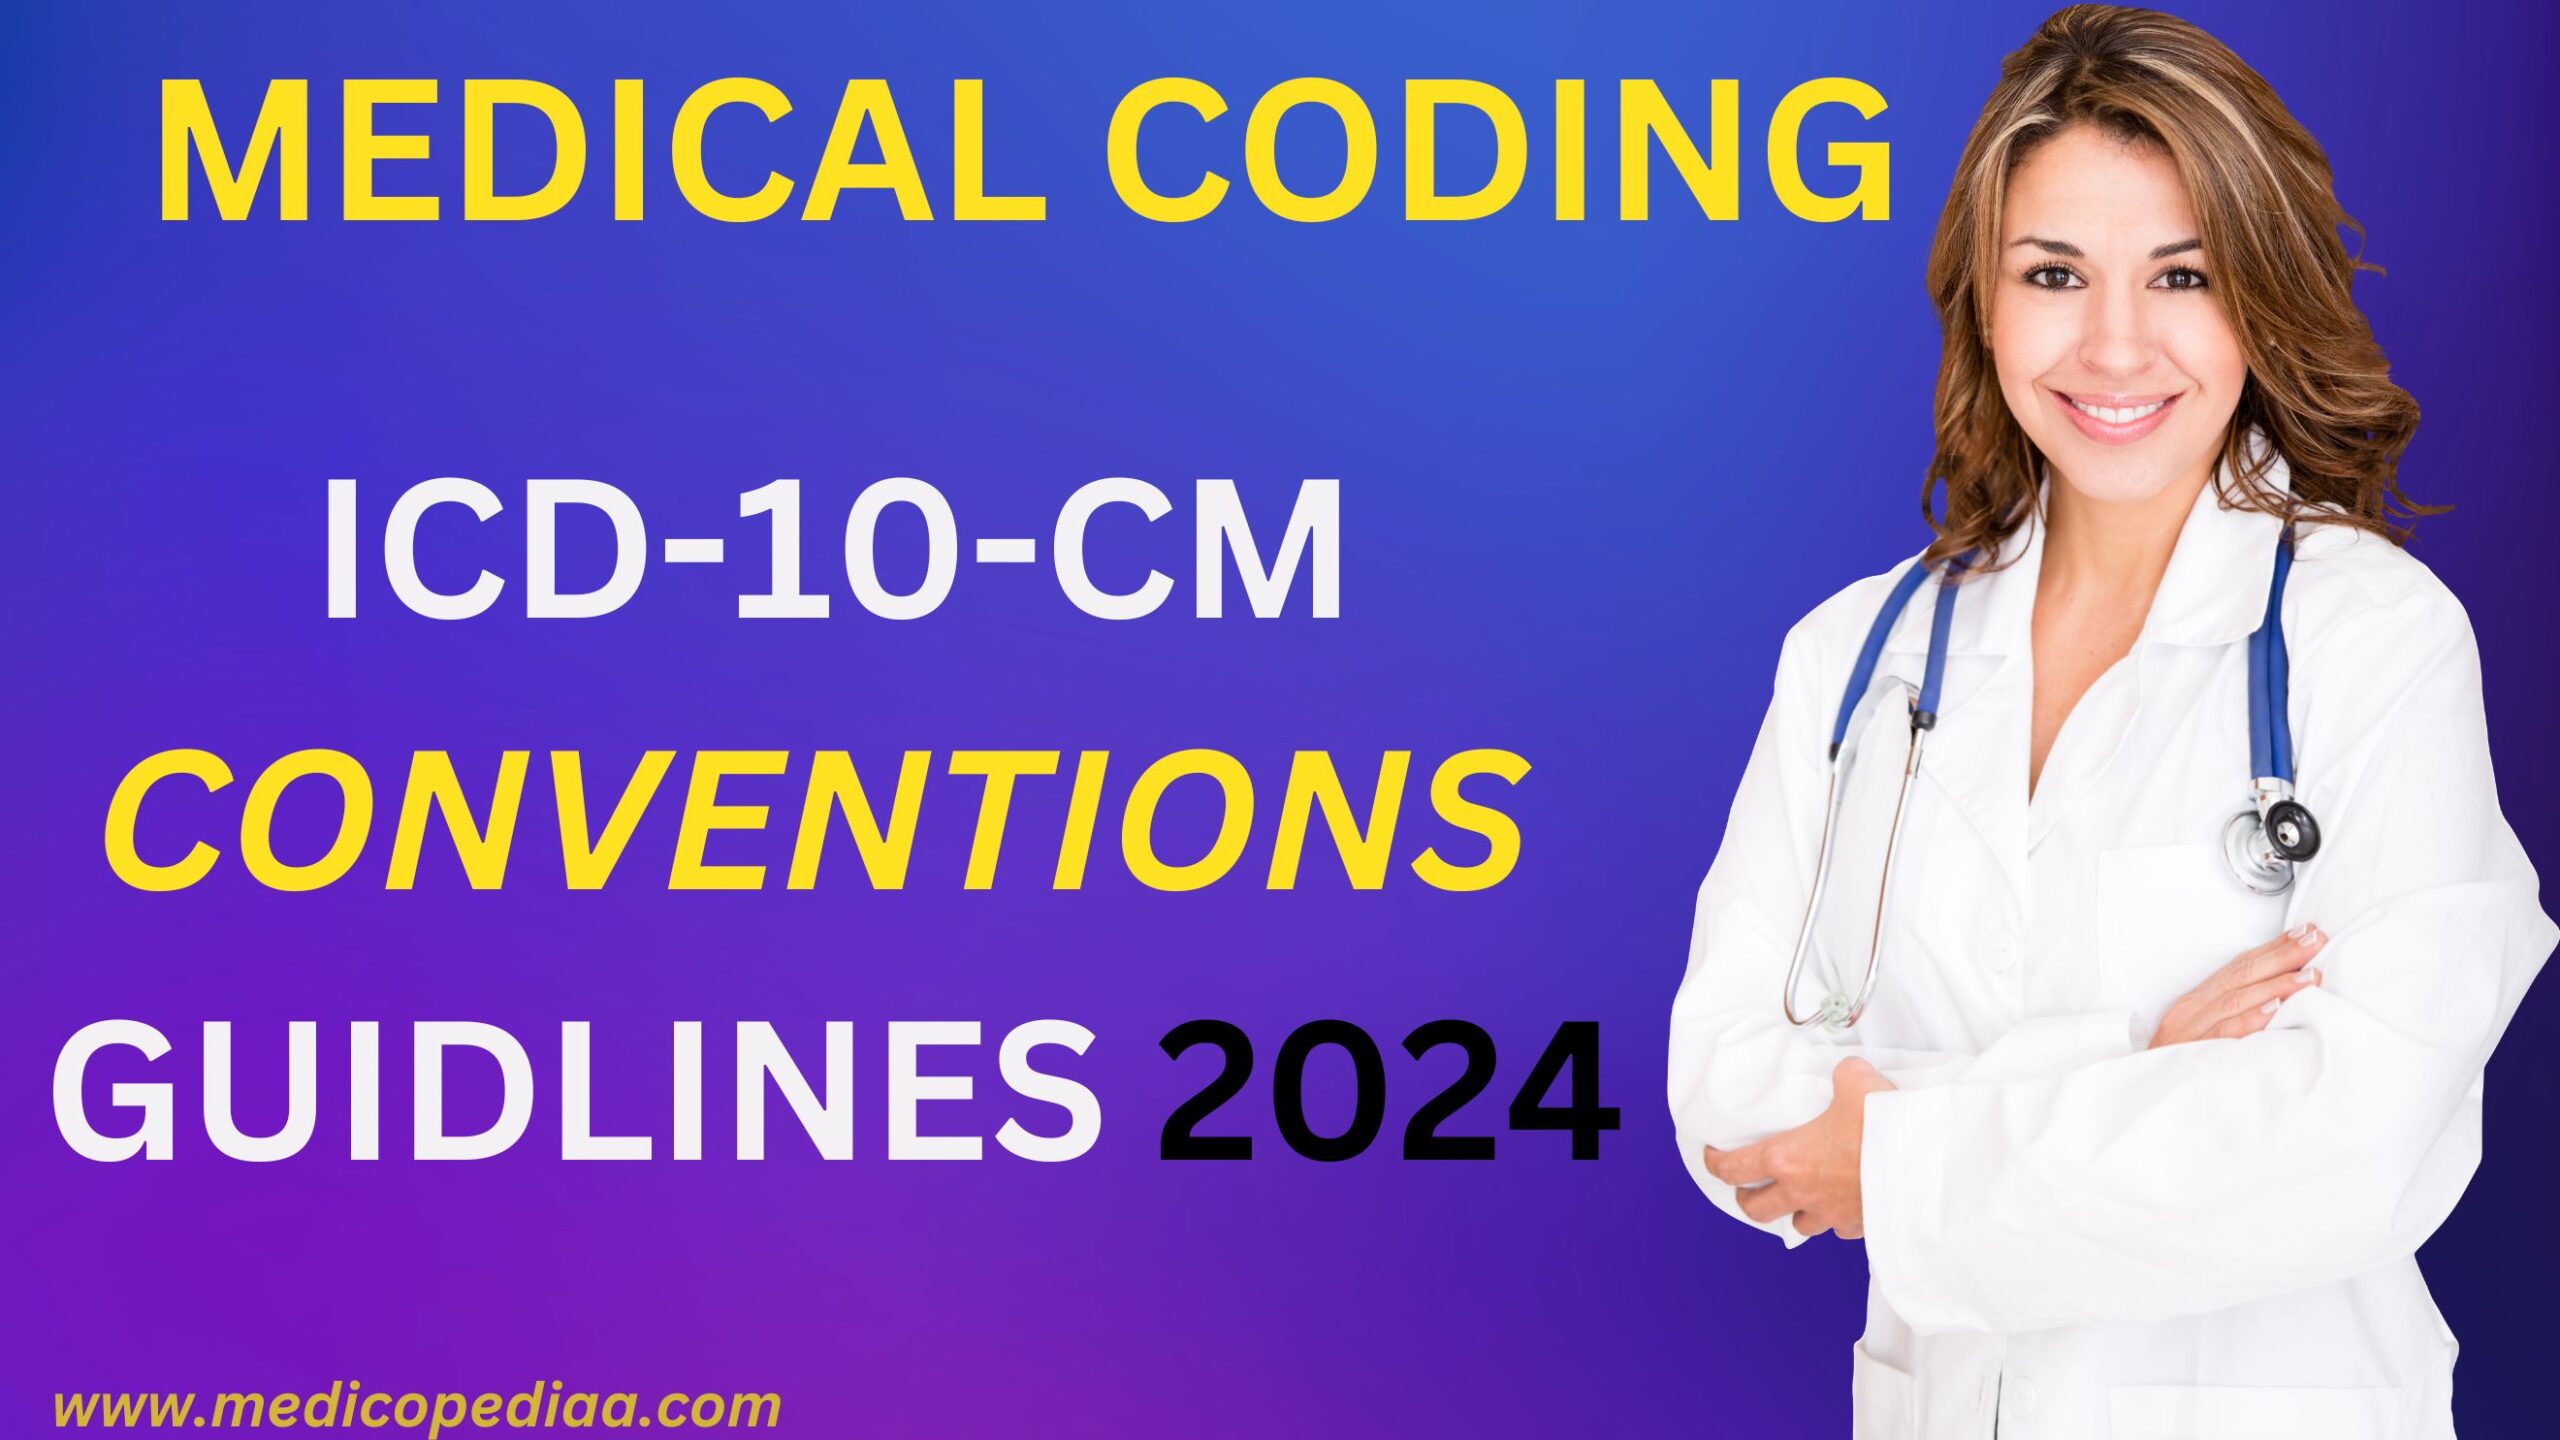 Icd 10 Cm Conventions Guidlines 2024 Medical Coding 5576